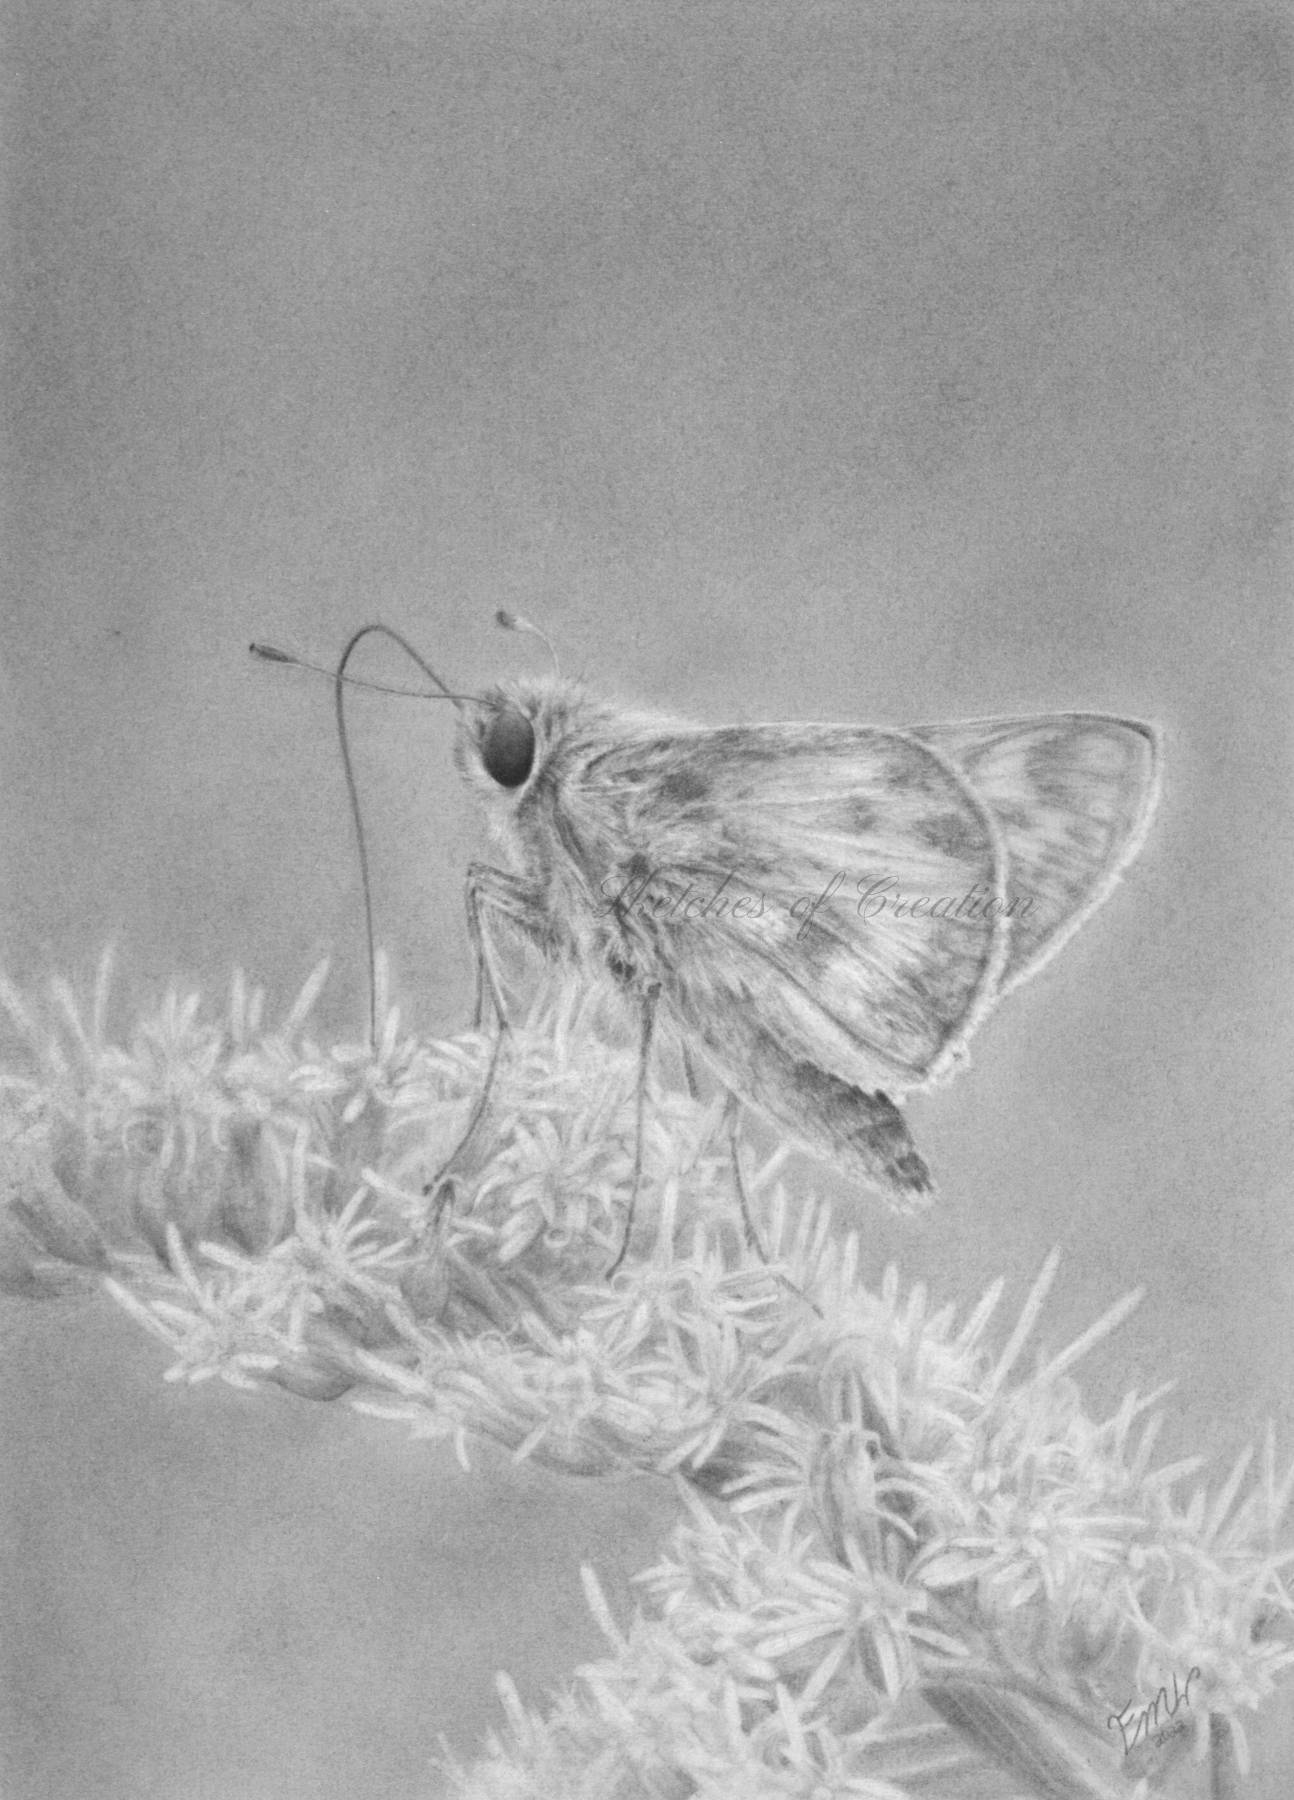 A drawing of a skipper butterfly on goldenrod